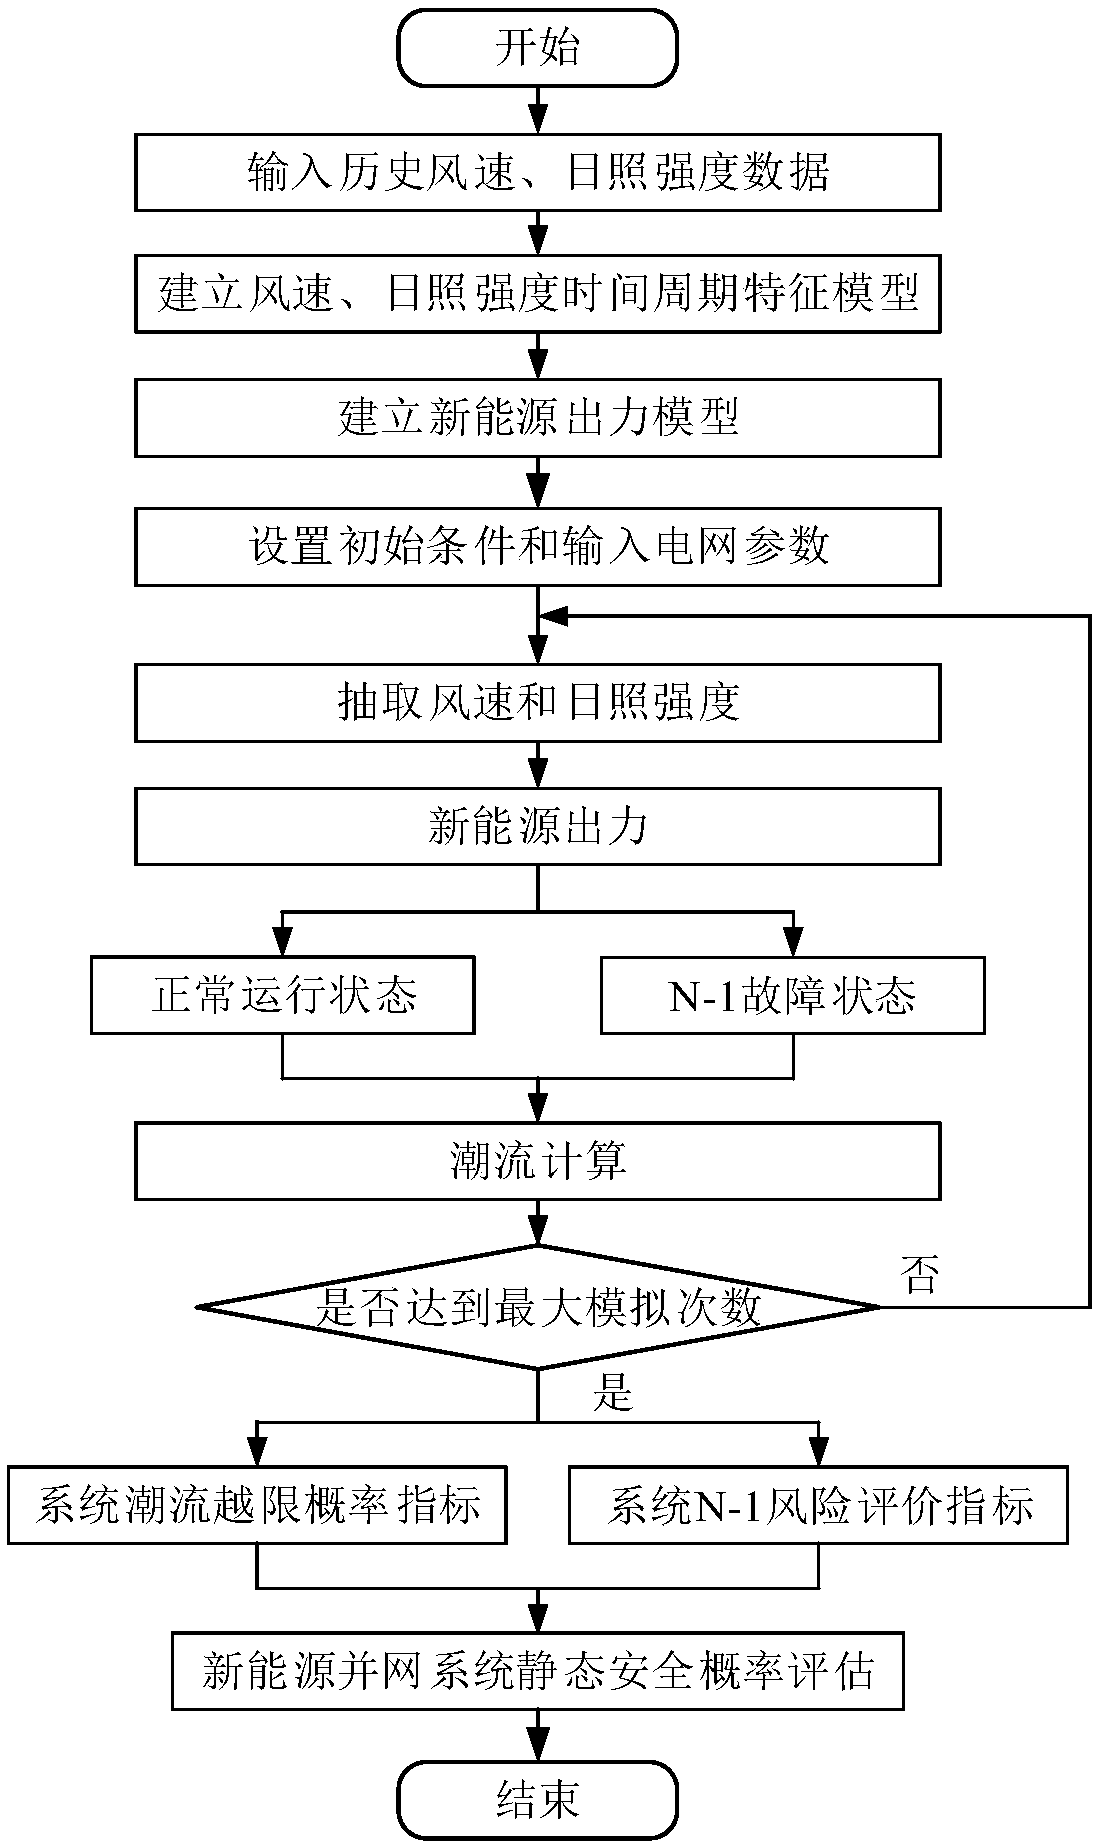 Static safety probability assessment method of new energy grid power system